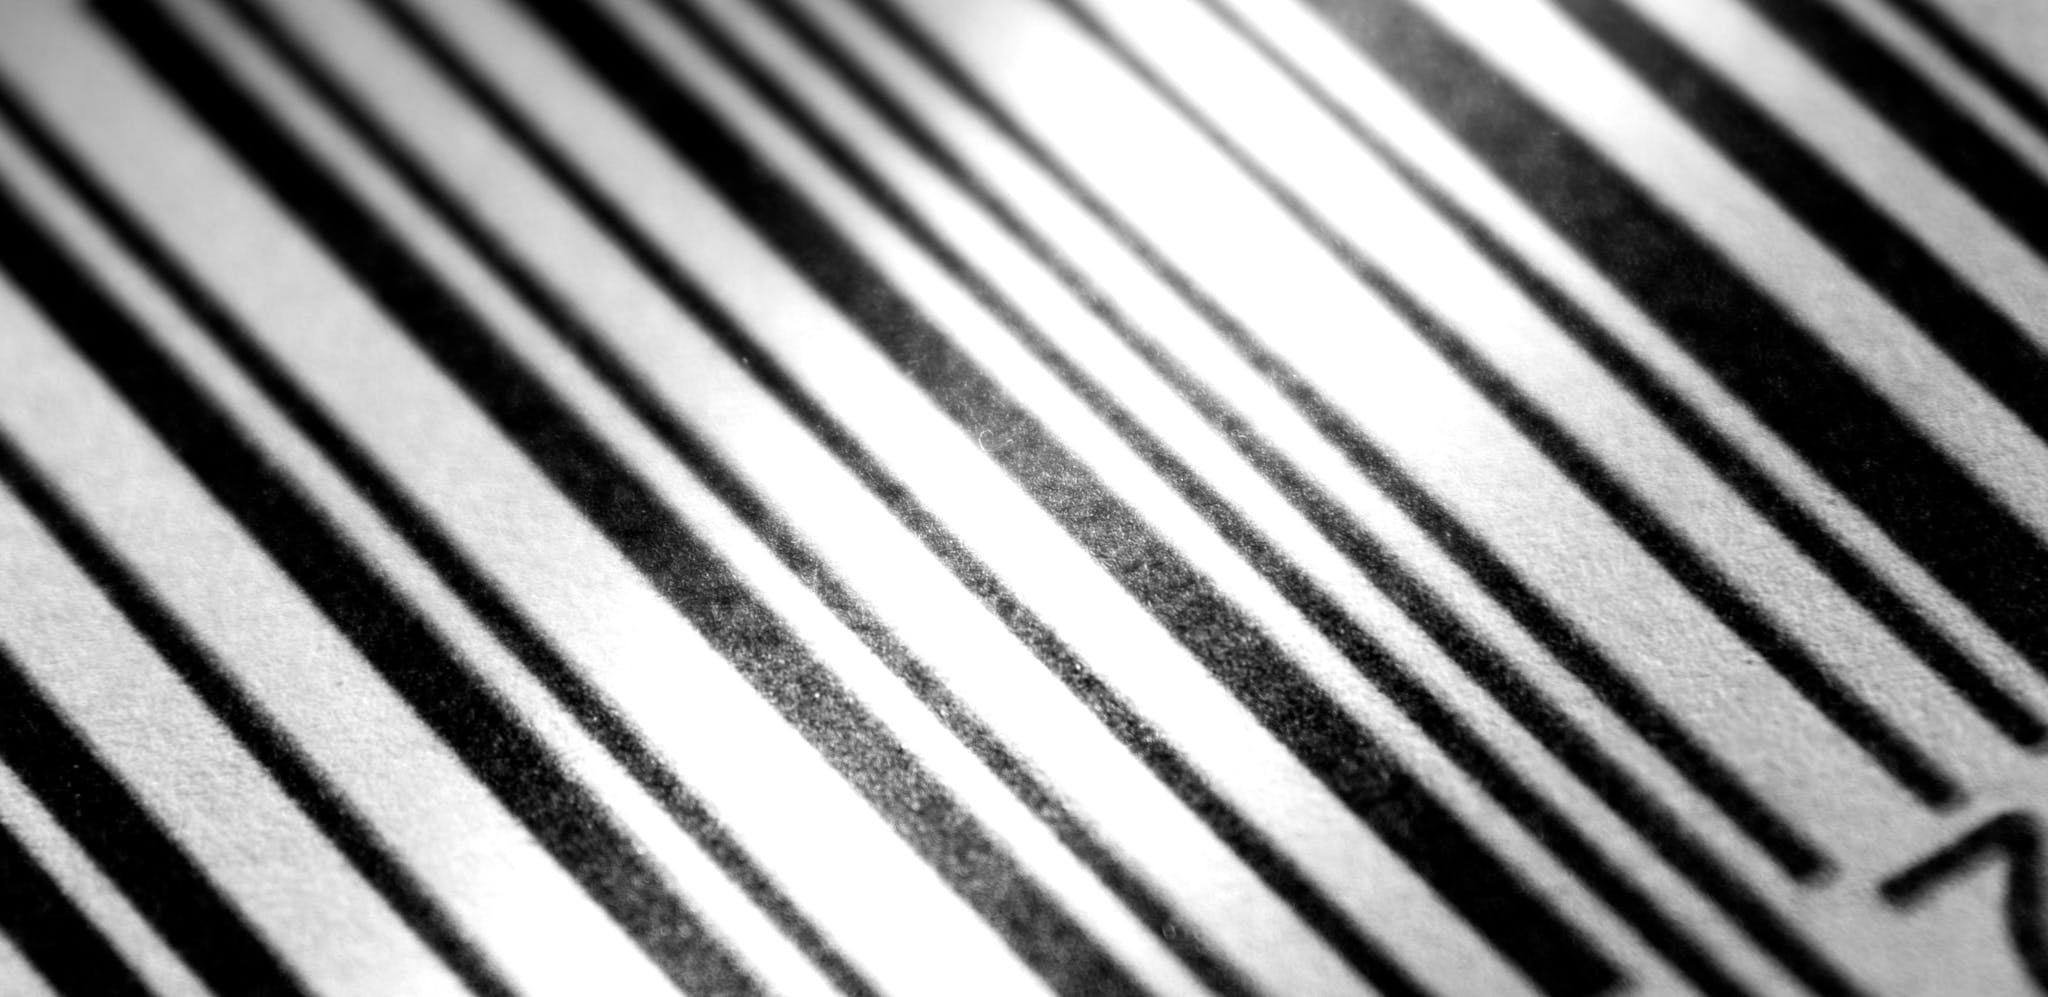 Extreme close up on the black and white lines of a barcode